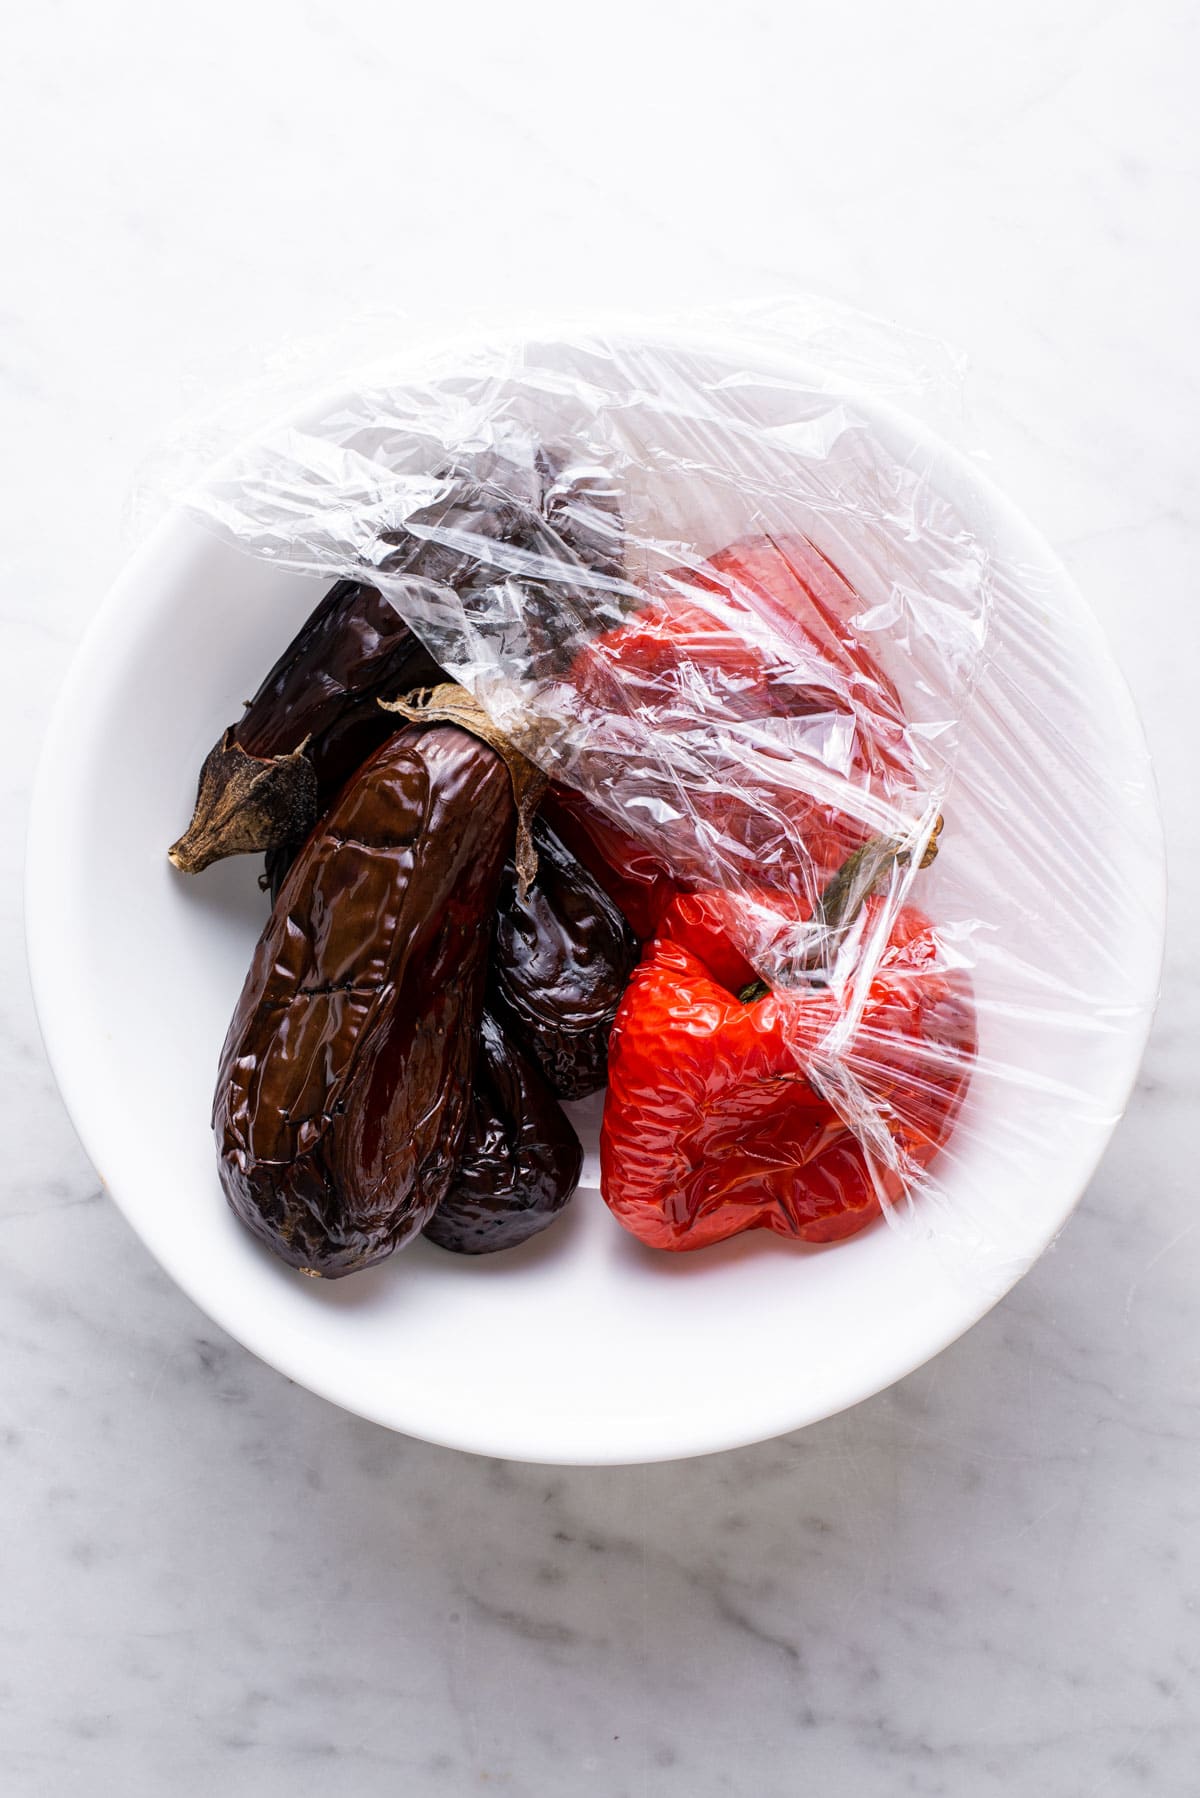 Roasted eggplants and peppers in a white bowl with plastic wrap.